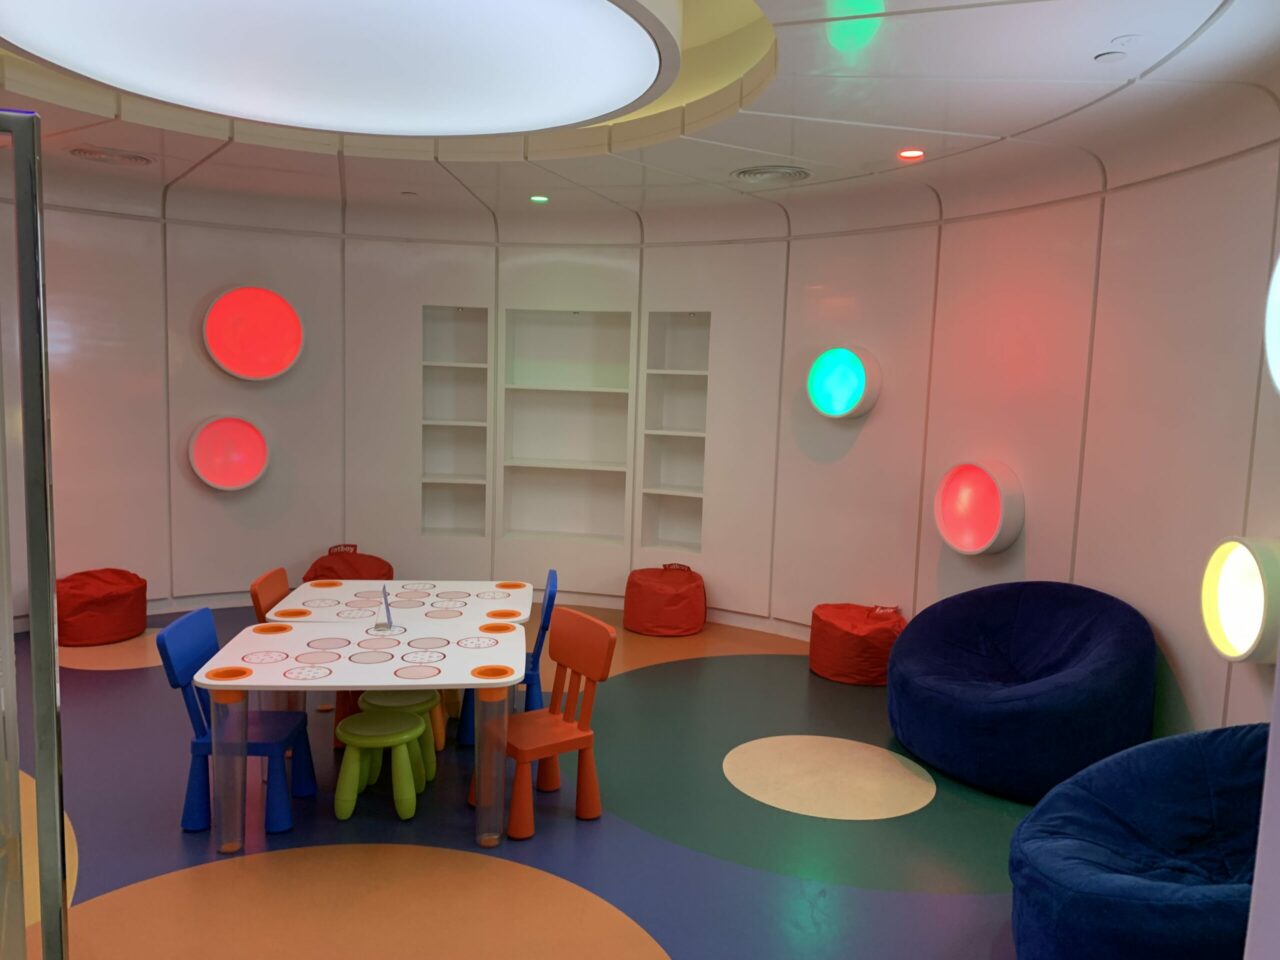 Children's Play Area at Etihad Business Lounge